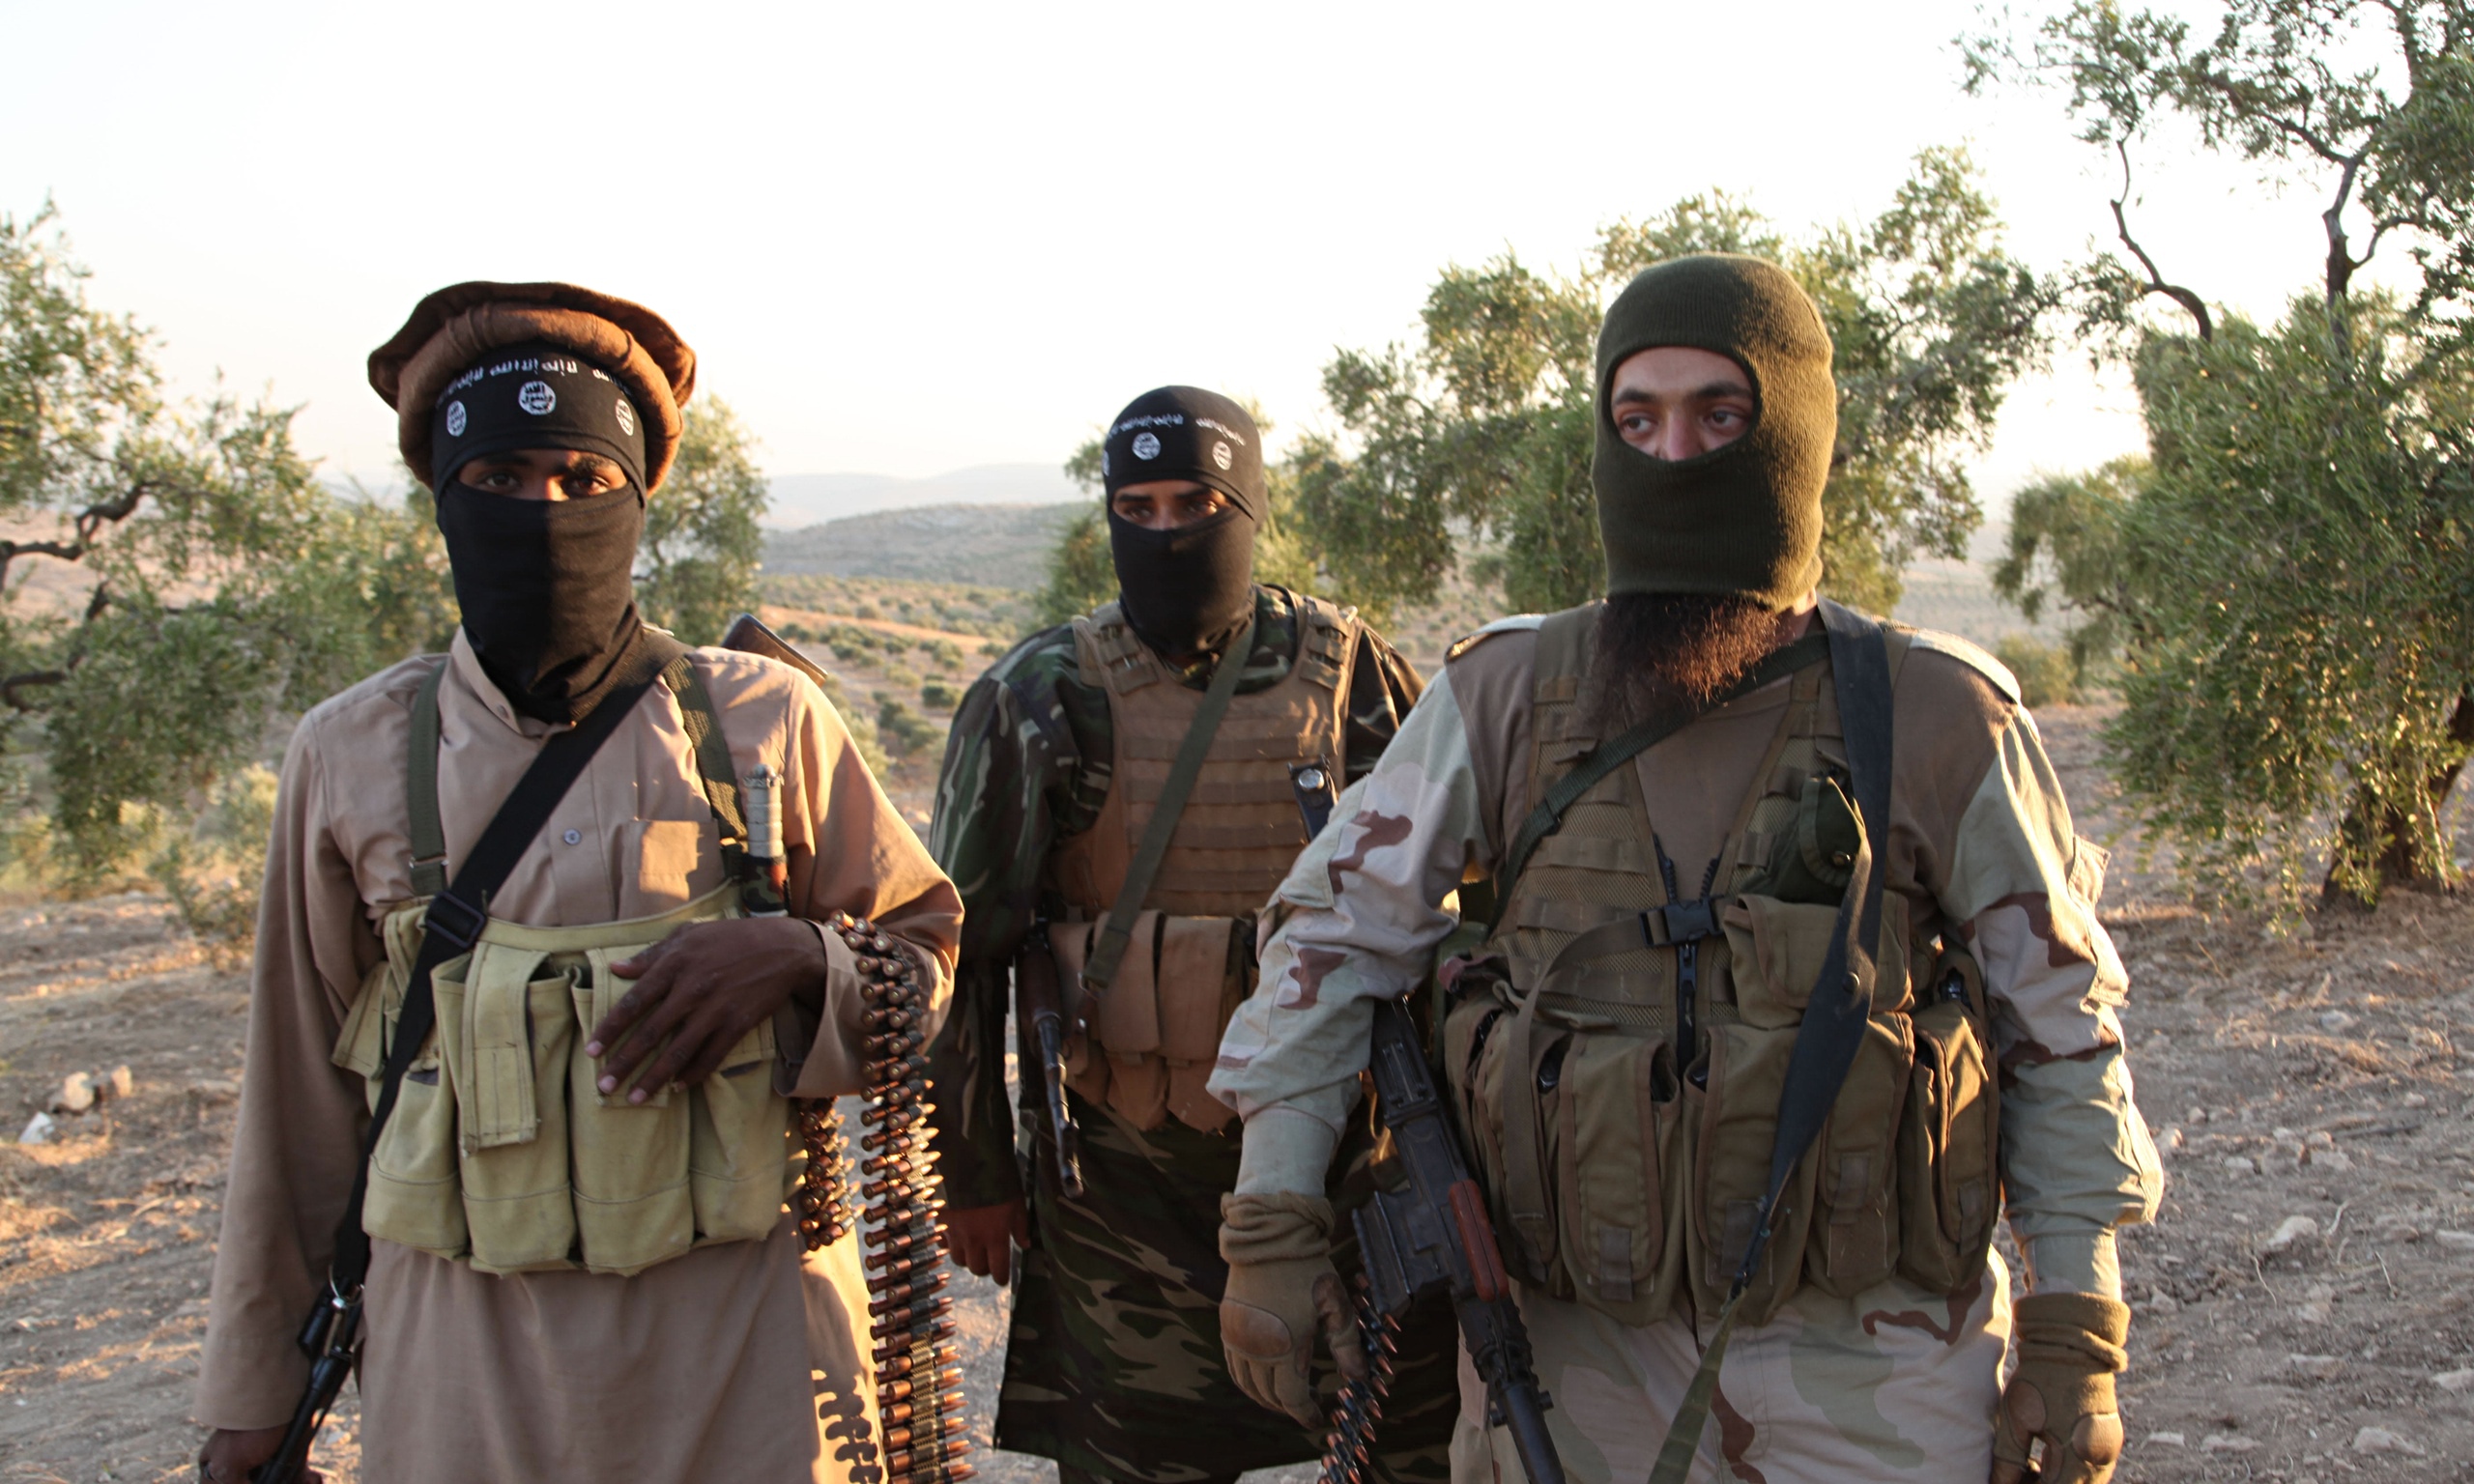 Report: ISIS Takes Villagers Hostage in Syria, Demands Prisoner Swap ...